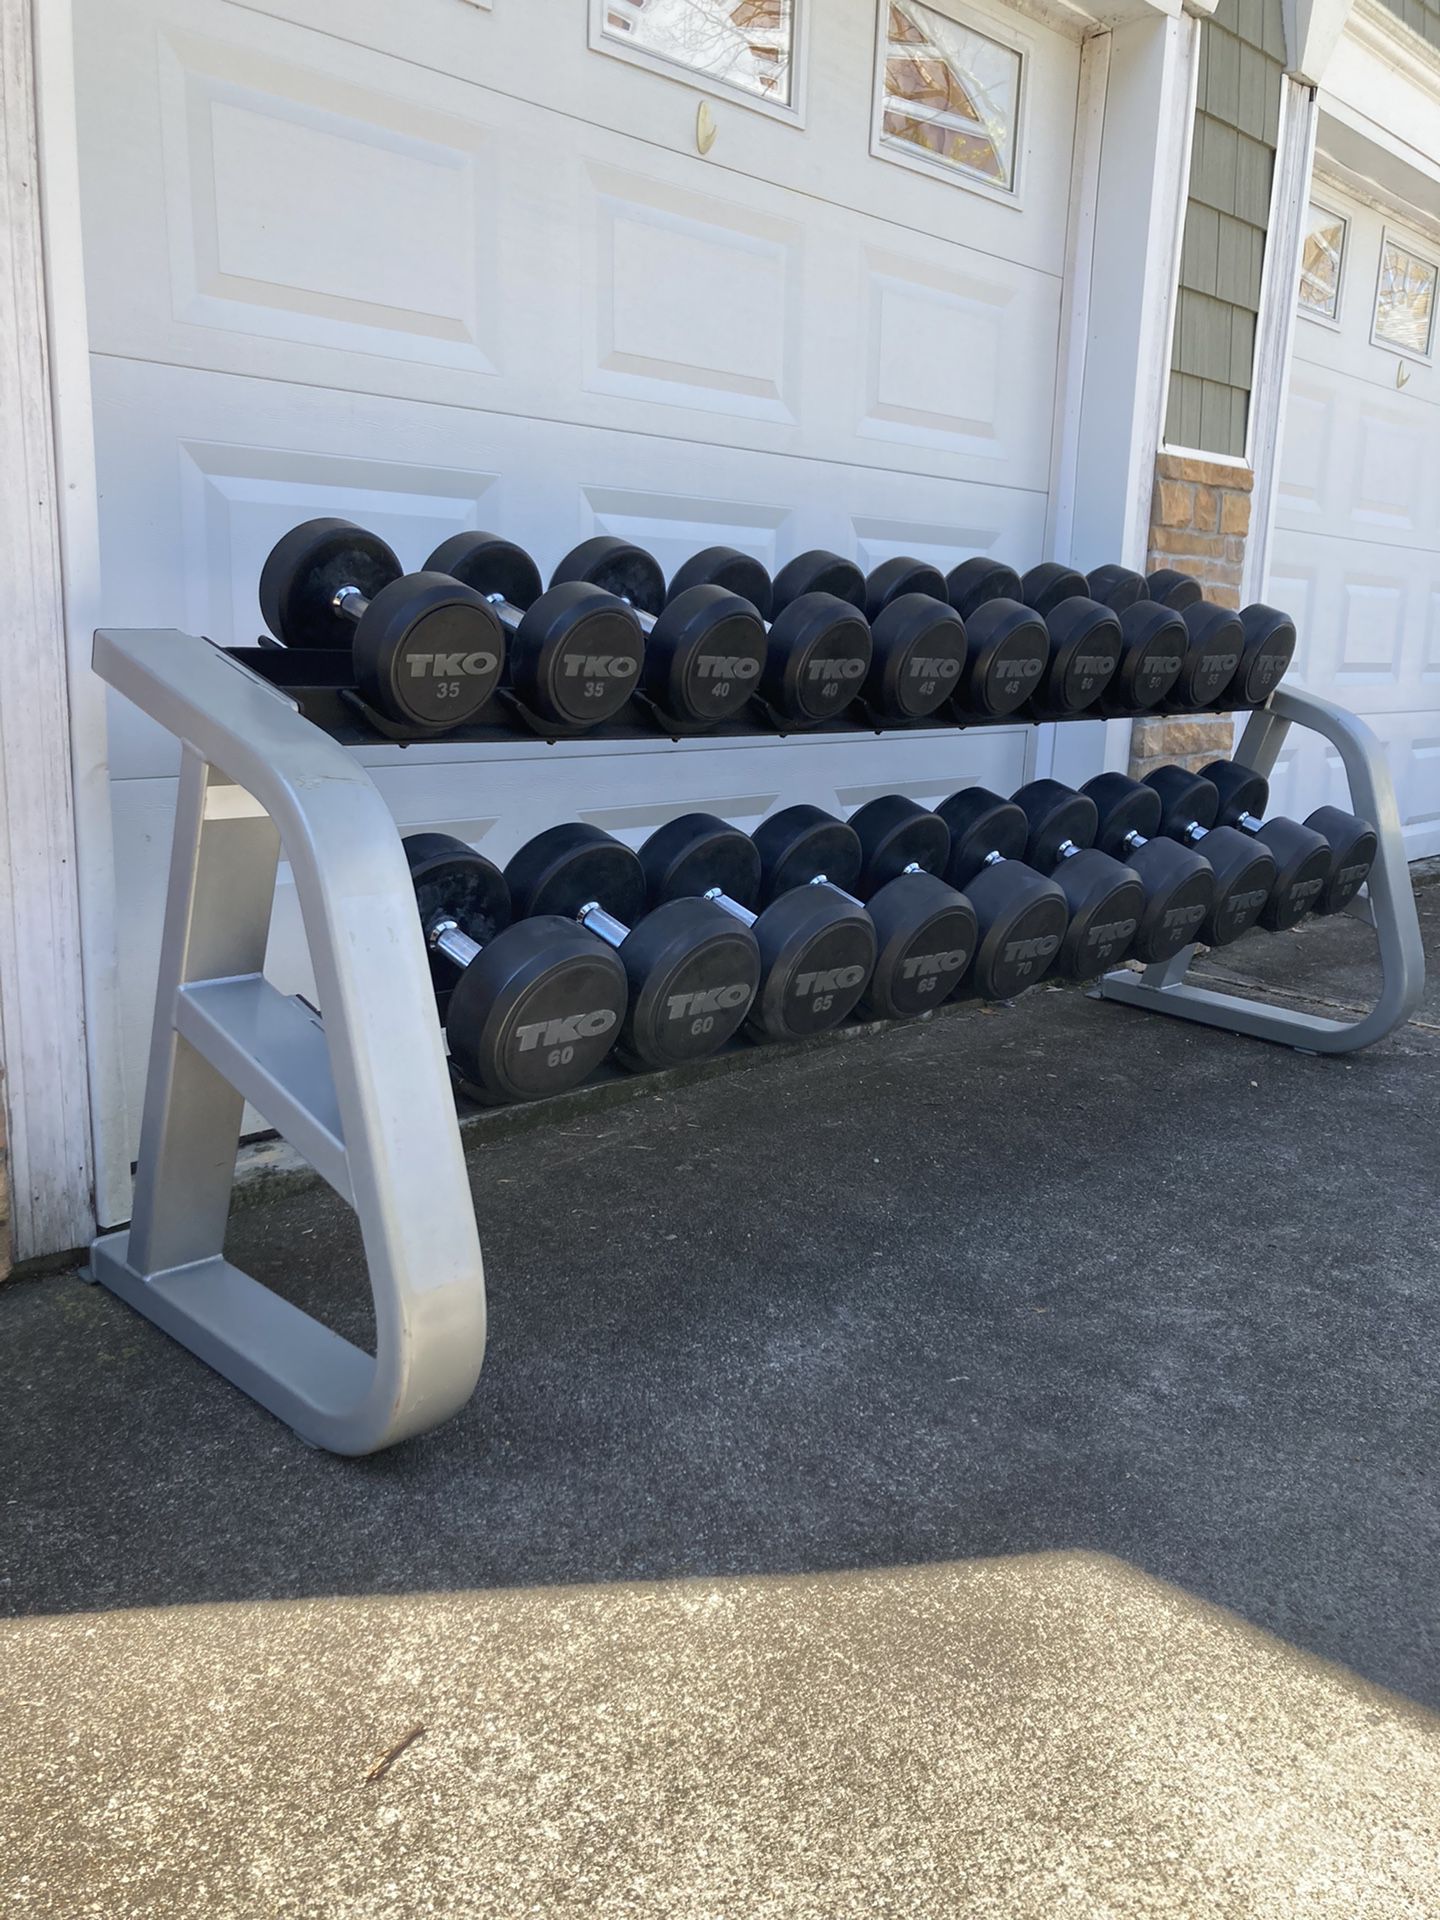 TKO Commercial Round Rubber Dumbbells 35-80 Complete Set Of 10 Pairs With Precor Commercial Rack - Excellent Condition